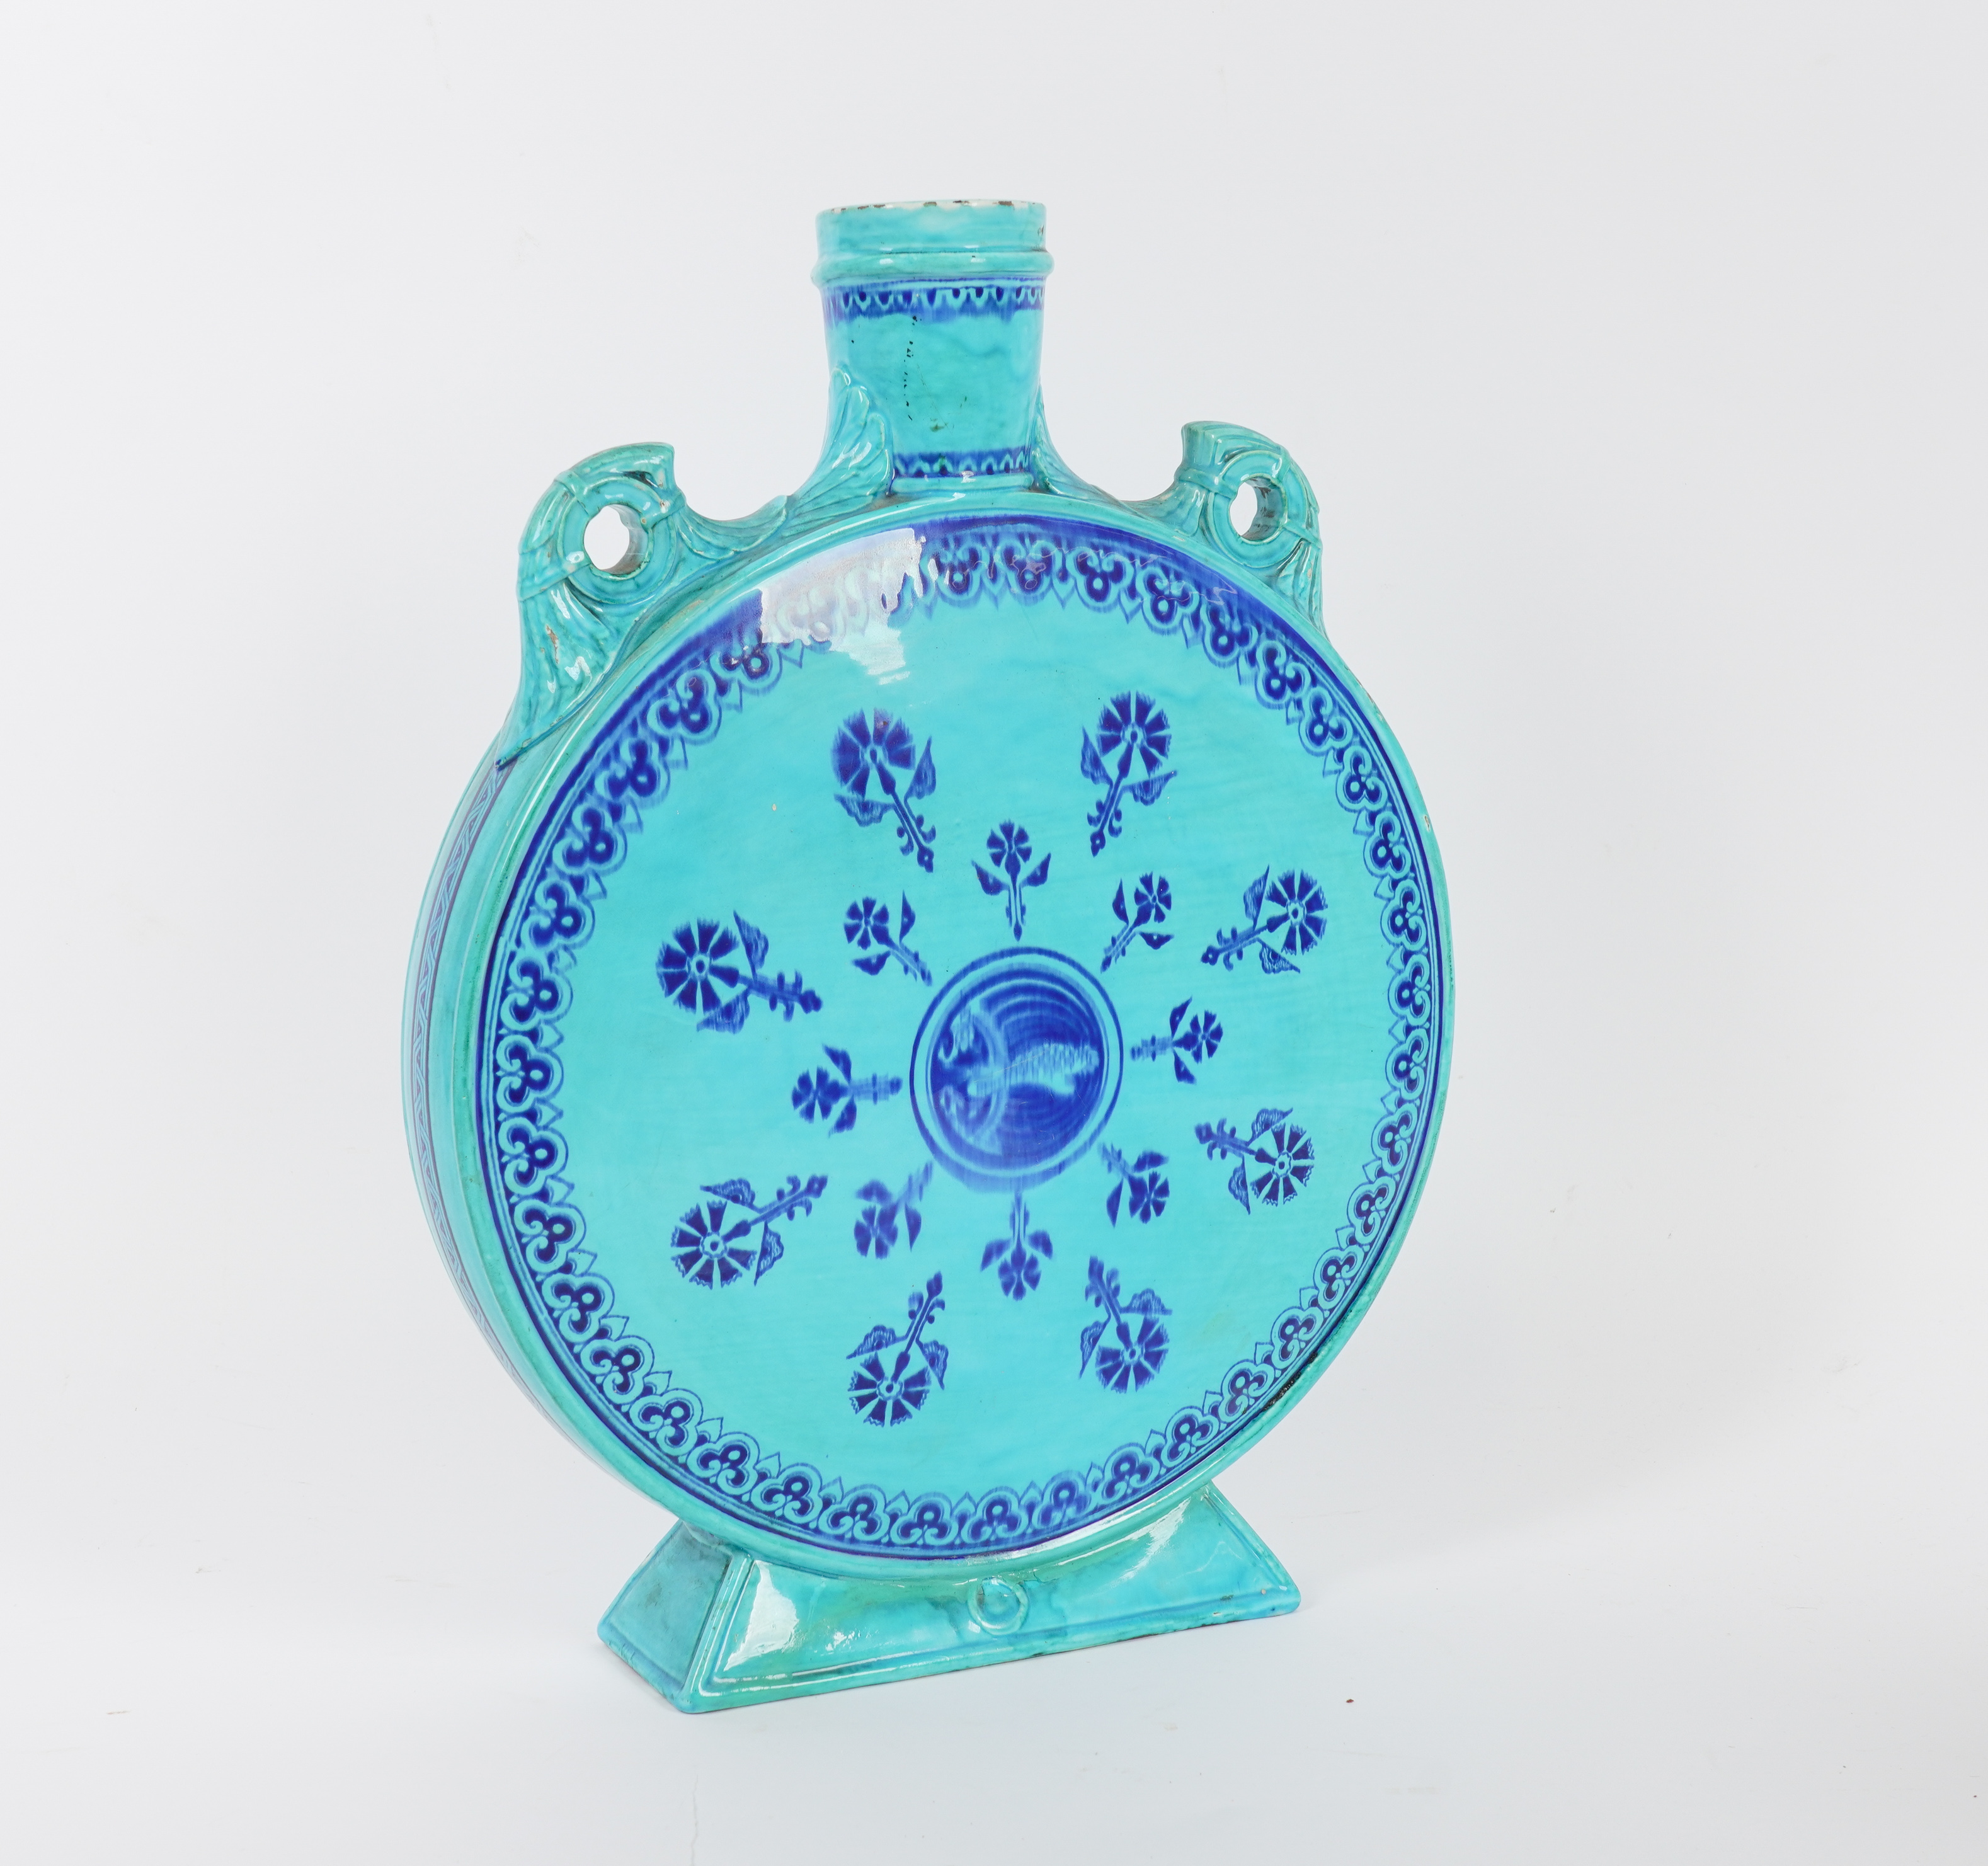 A LARGE MINTON TURQUOISE GROUND MOONFLASK ATTRIBUTED TO CHRISTOPHER DRESSER - Image 2 of 3